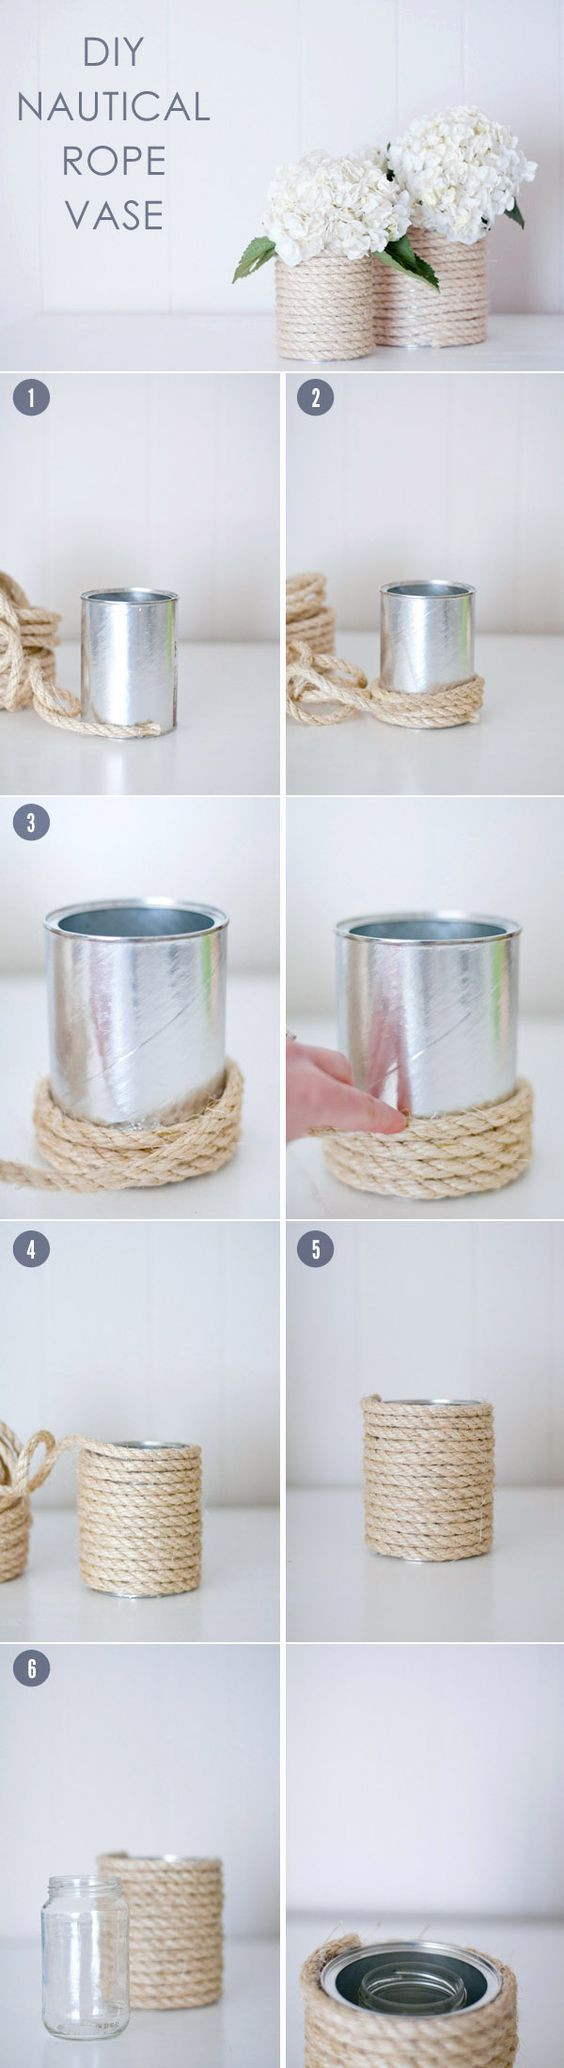 Nautical DIY Decorations
 16 Nautical Rope DIY Crafts With a Perfect Twists